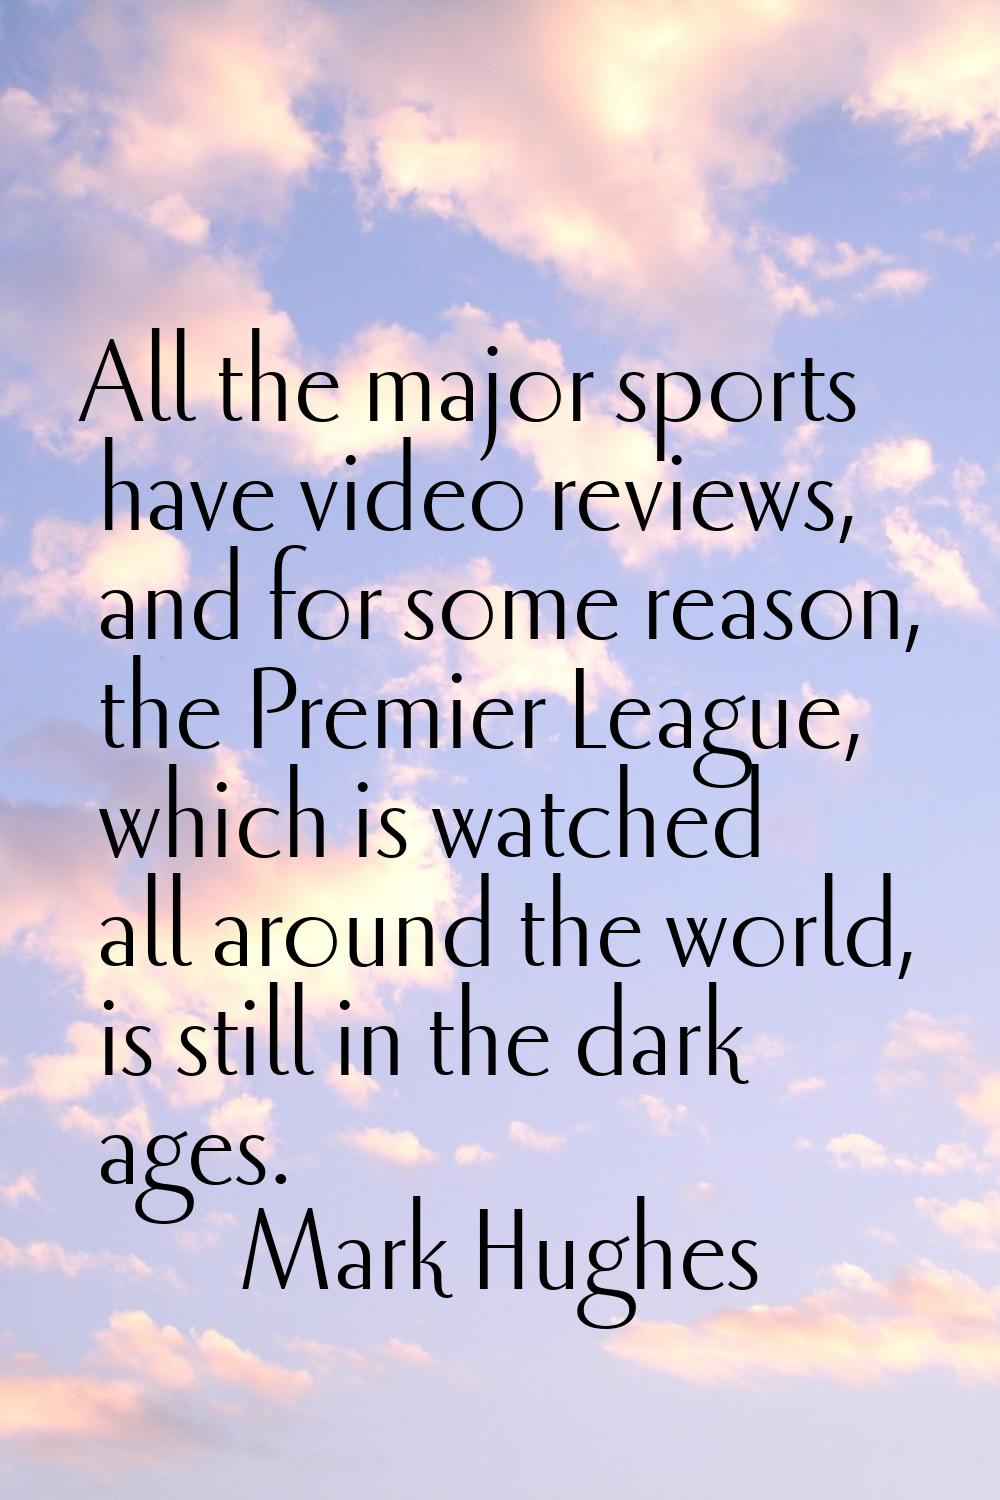 All the major sports have video reviews, and for some reason, the Premier League, which is watched 